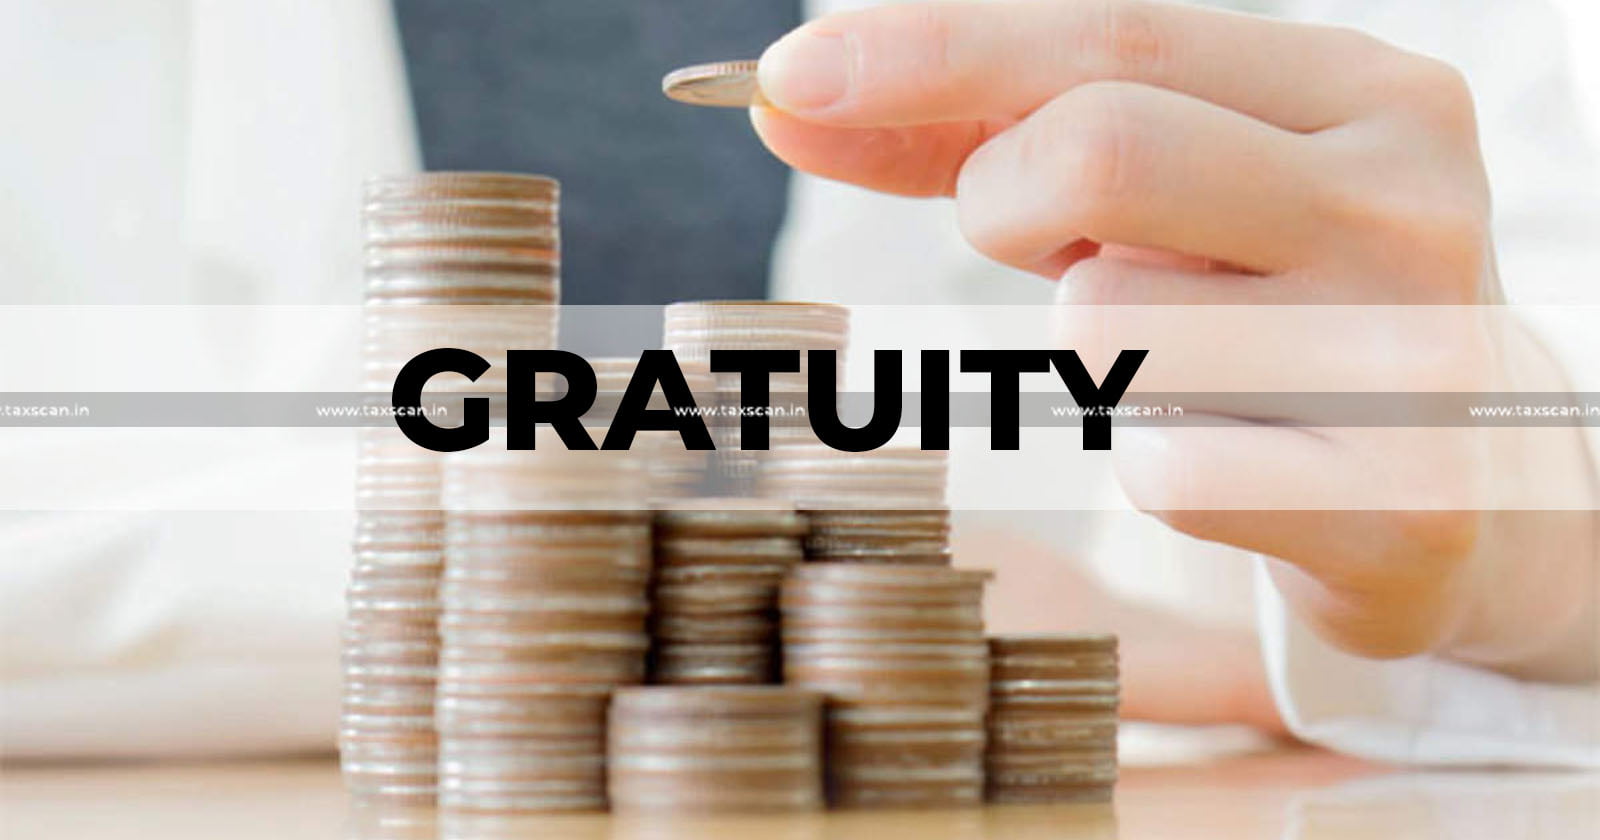 Gratuity - Employee Classified - Salary - Deemed Expense allowable us 37(1) of Income Tax Act - ITAT - TAXSCAN